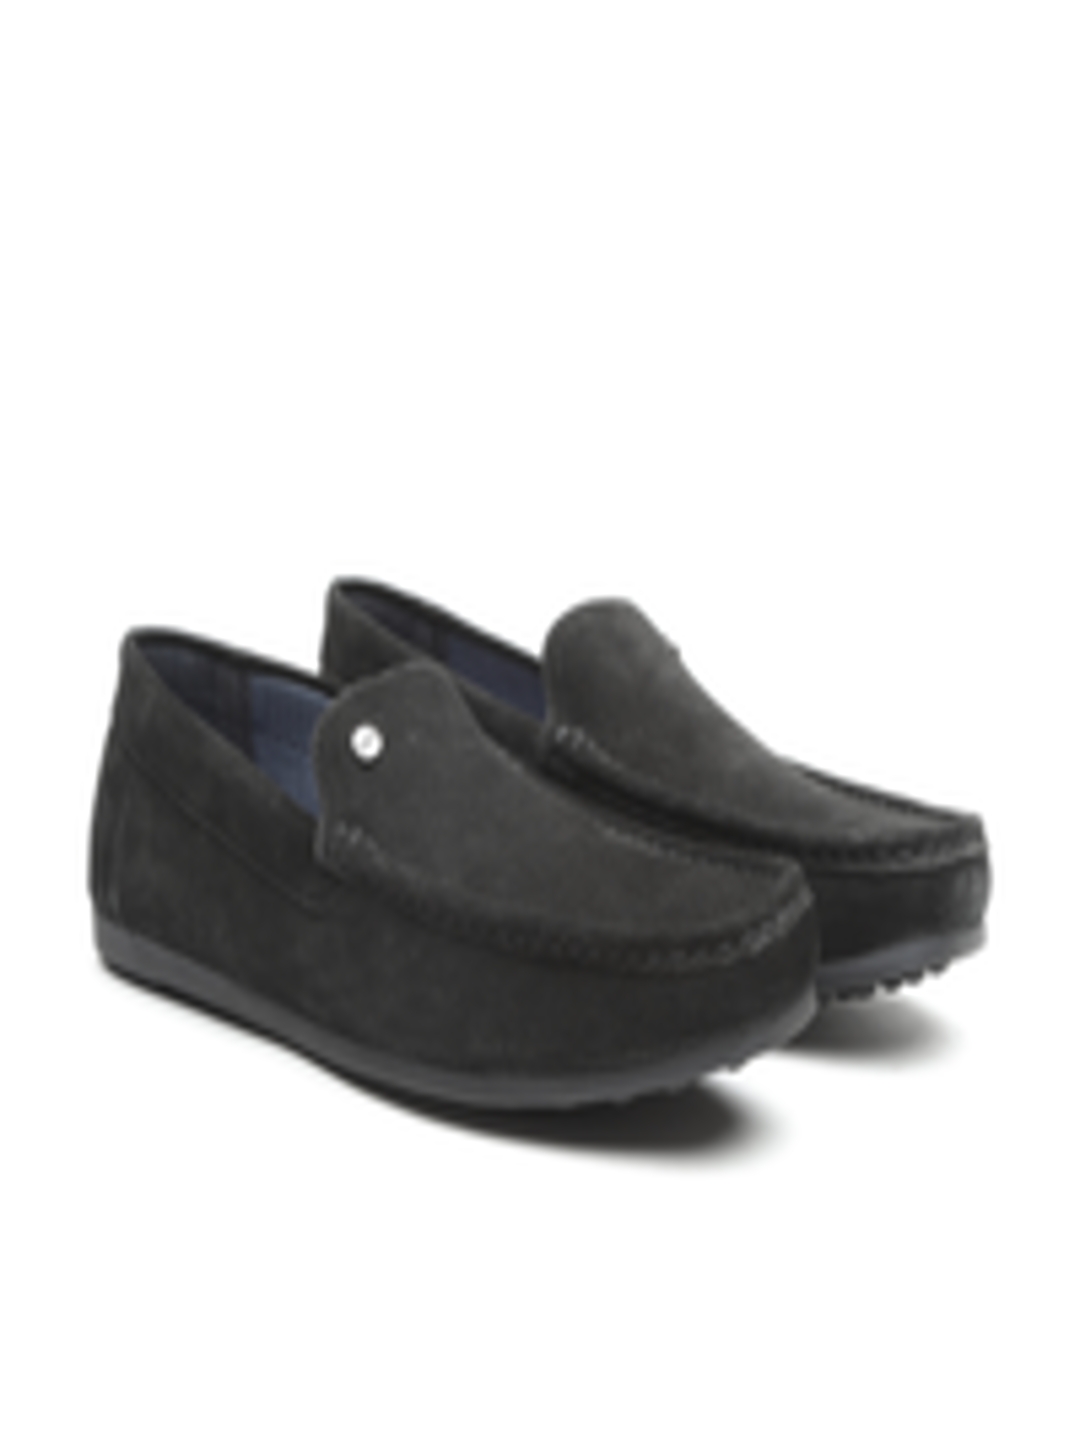 Buy Carlton London Men Black Suede Loafers - Casual Shoes for Men ...